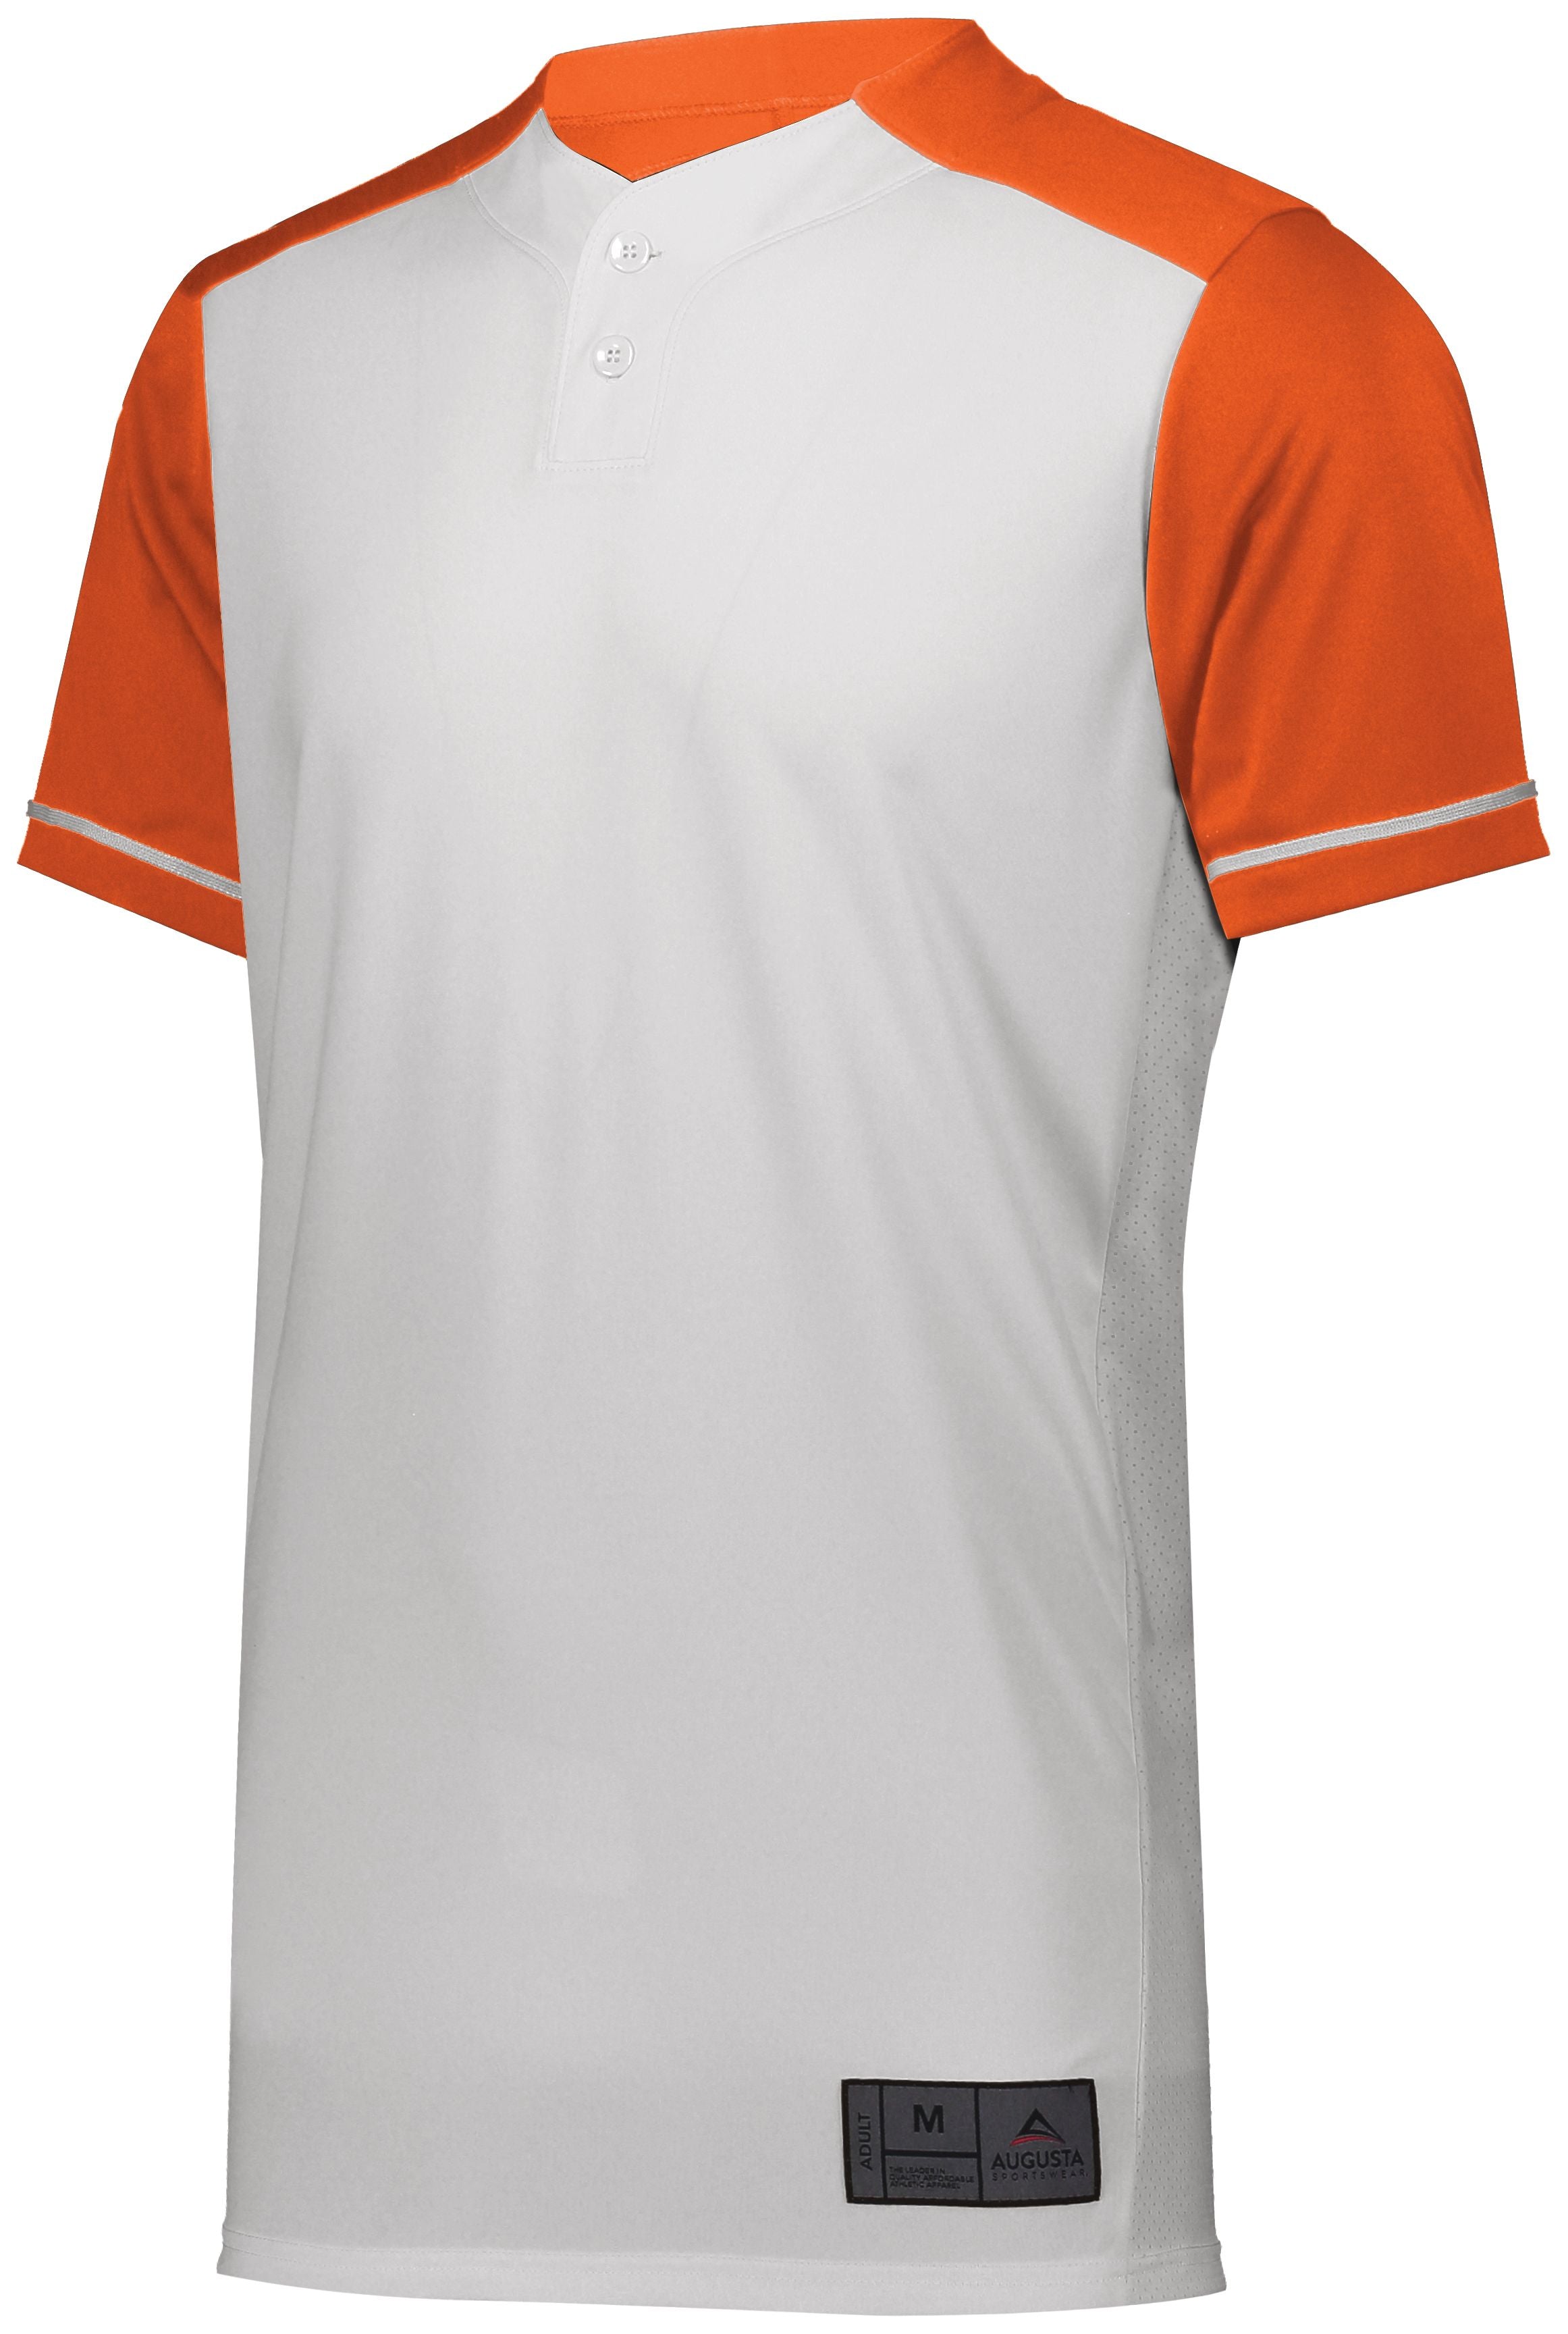 Augusta Sportswear Youth Closer Jersey in White/Orange  -Part of the Youth, Youth-Jersey, Augusta-Products, Baseball, Shirts, All-Sports, All-Sports-1 product lines at KanaleyCreations.com